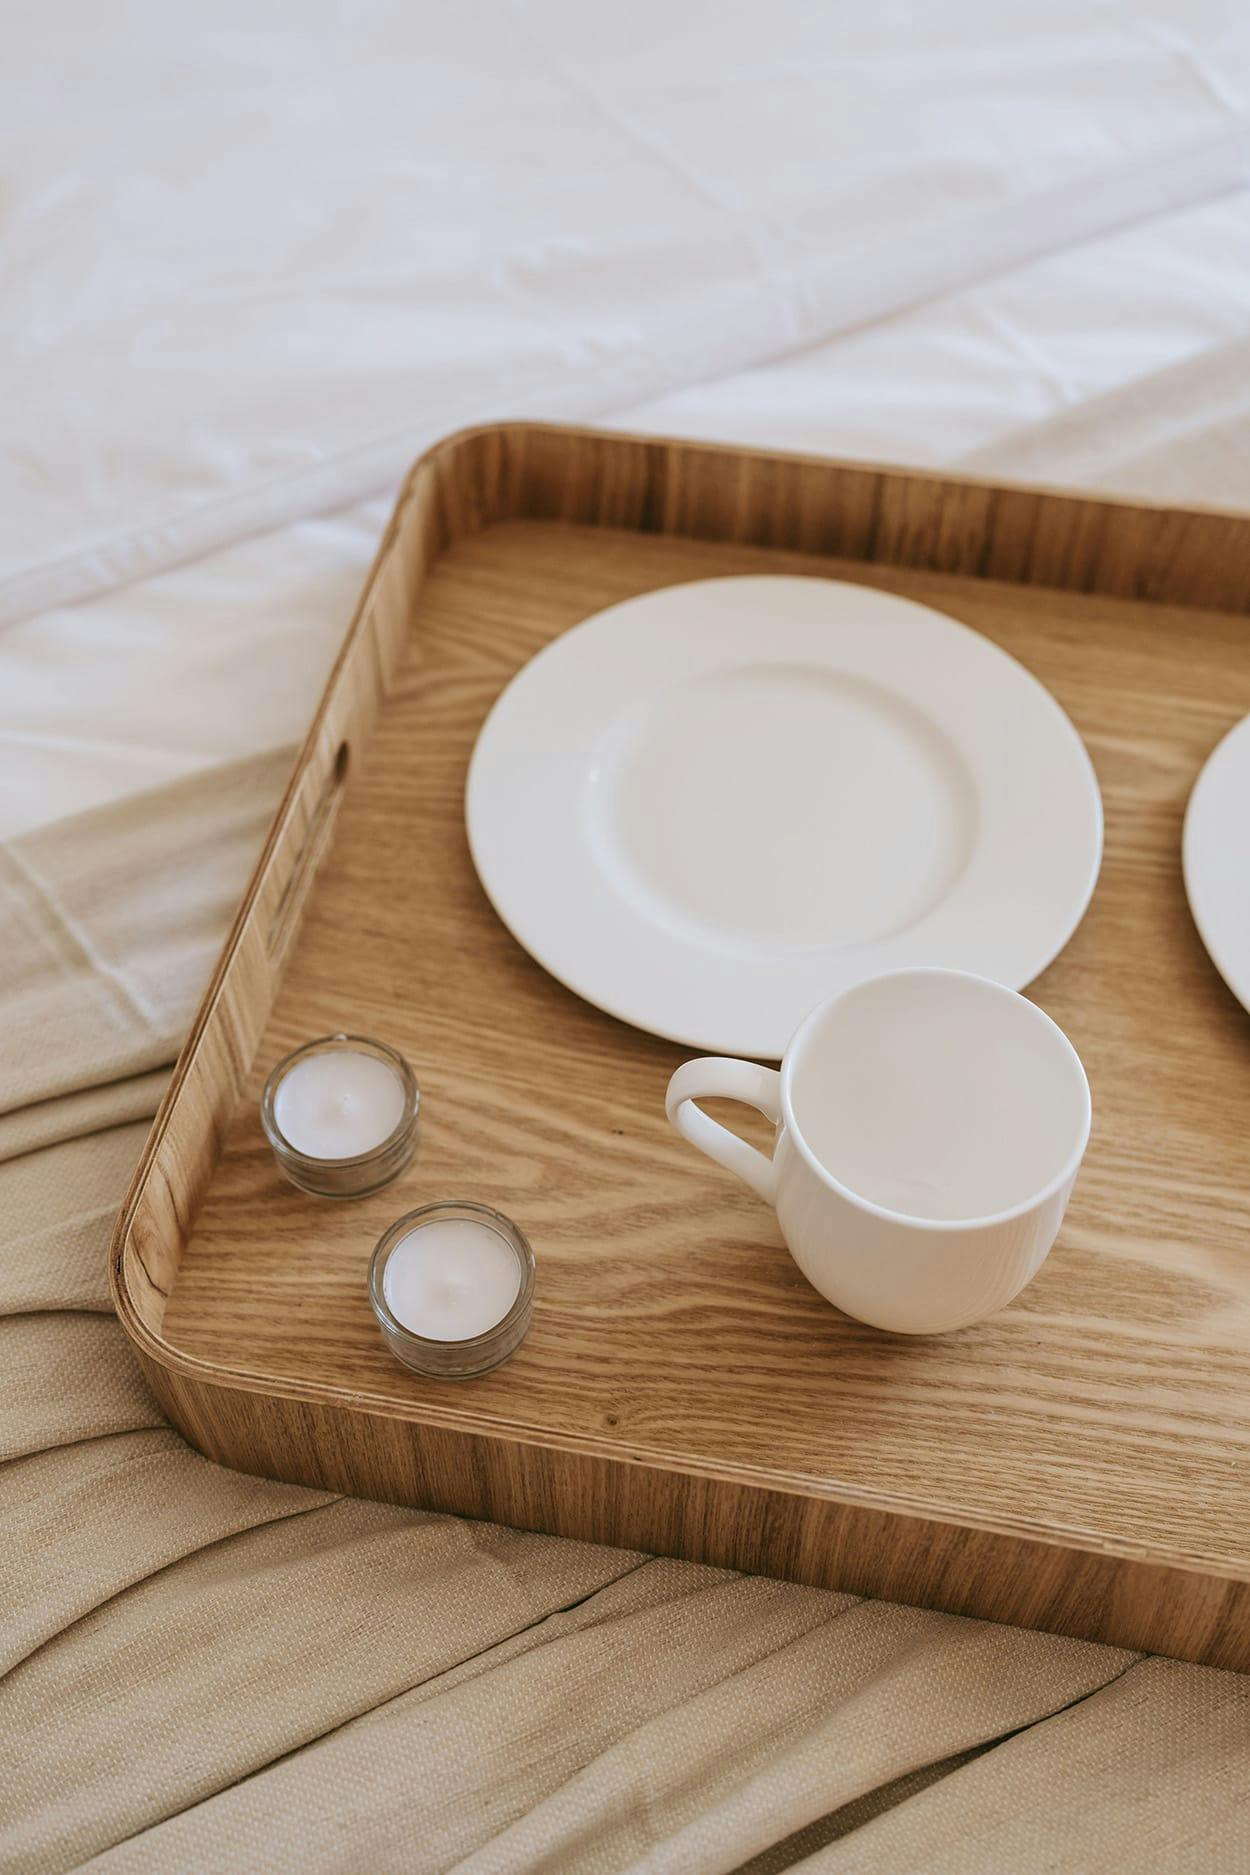 A wooden tray with a white plate, a cup, and a spoon is placed on a bed, creating a simple and elegant dining setup.